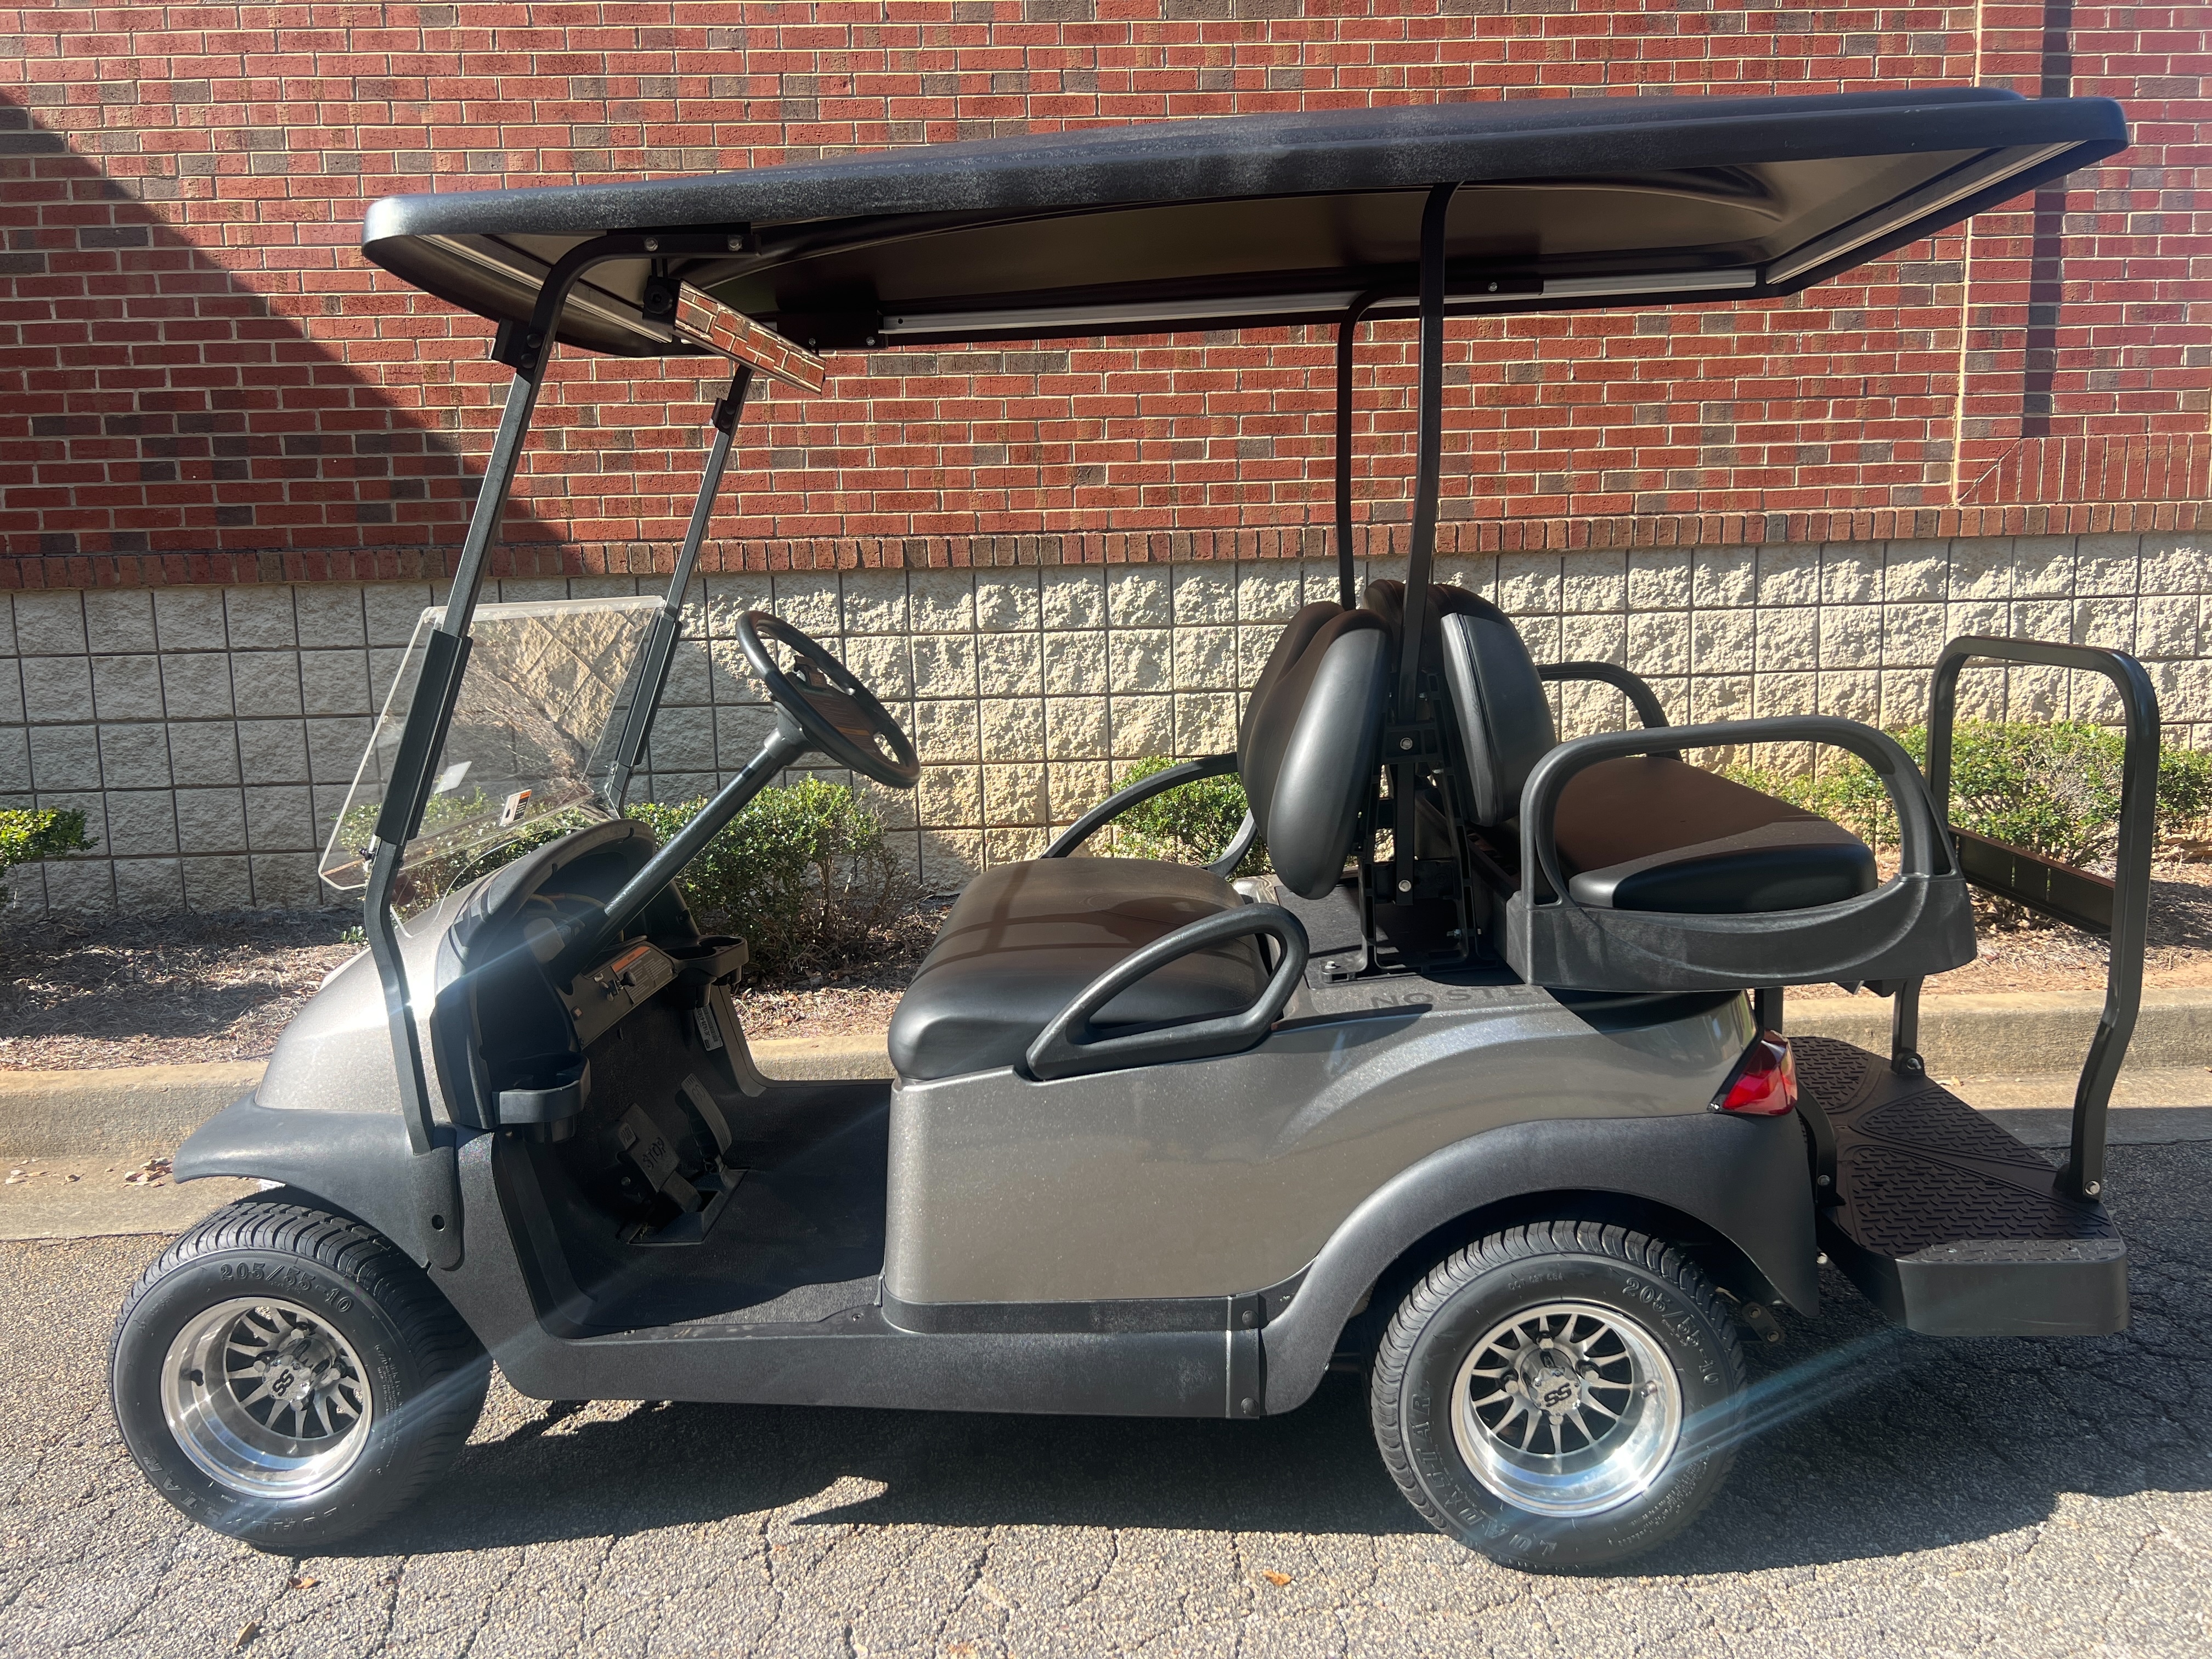 Bulldog Golf Cars I Peachtree City, GA I Georgia's Premier Golf Car  Dealership I Featuring New & Pre-Owned golf cars as well as parts, service,  and financing